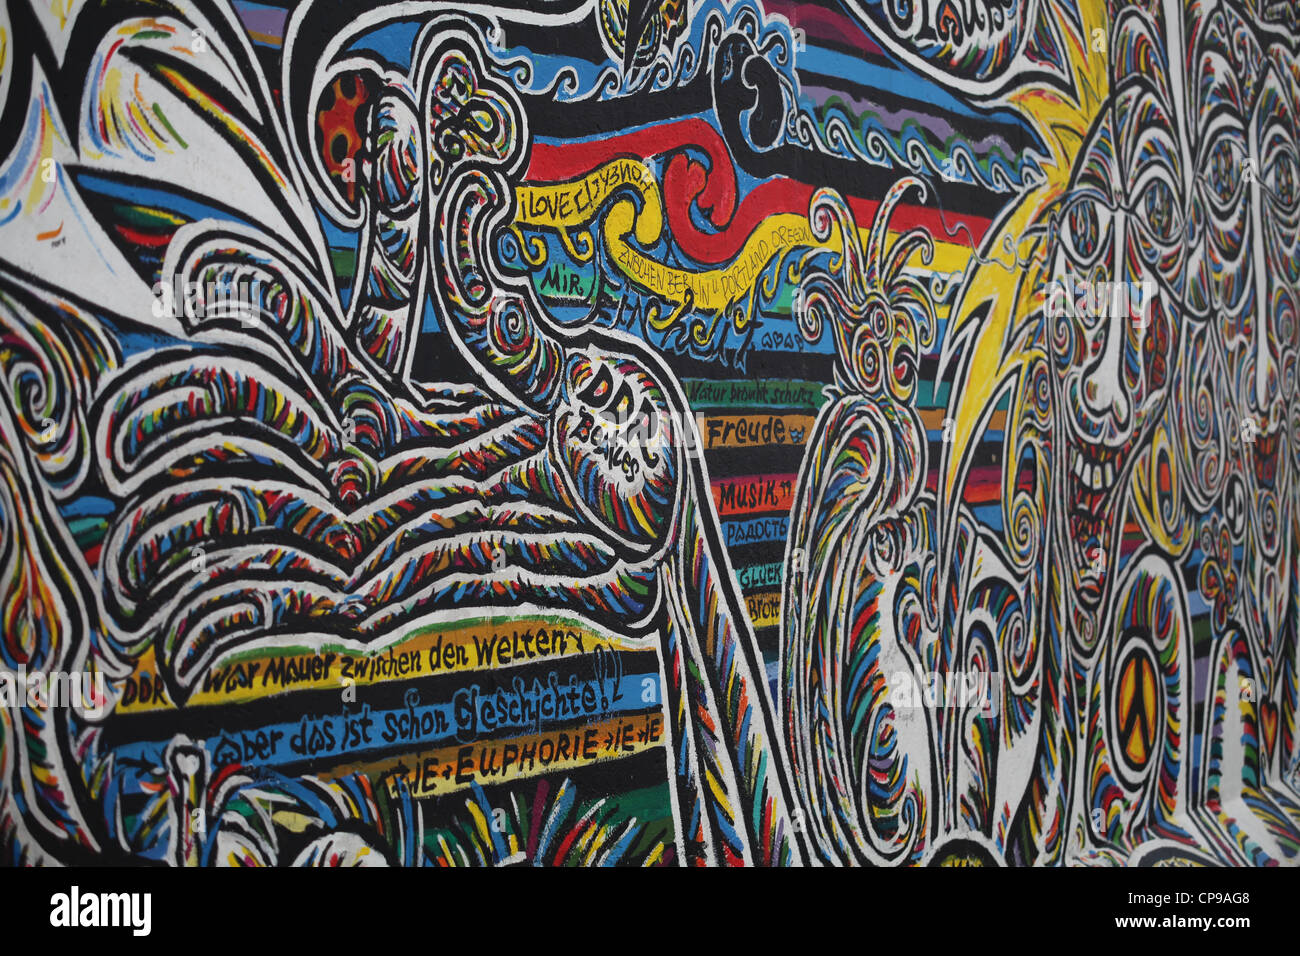 Berlin Wall East Side Gallery painting Stock Photo